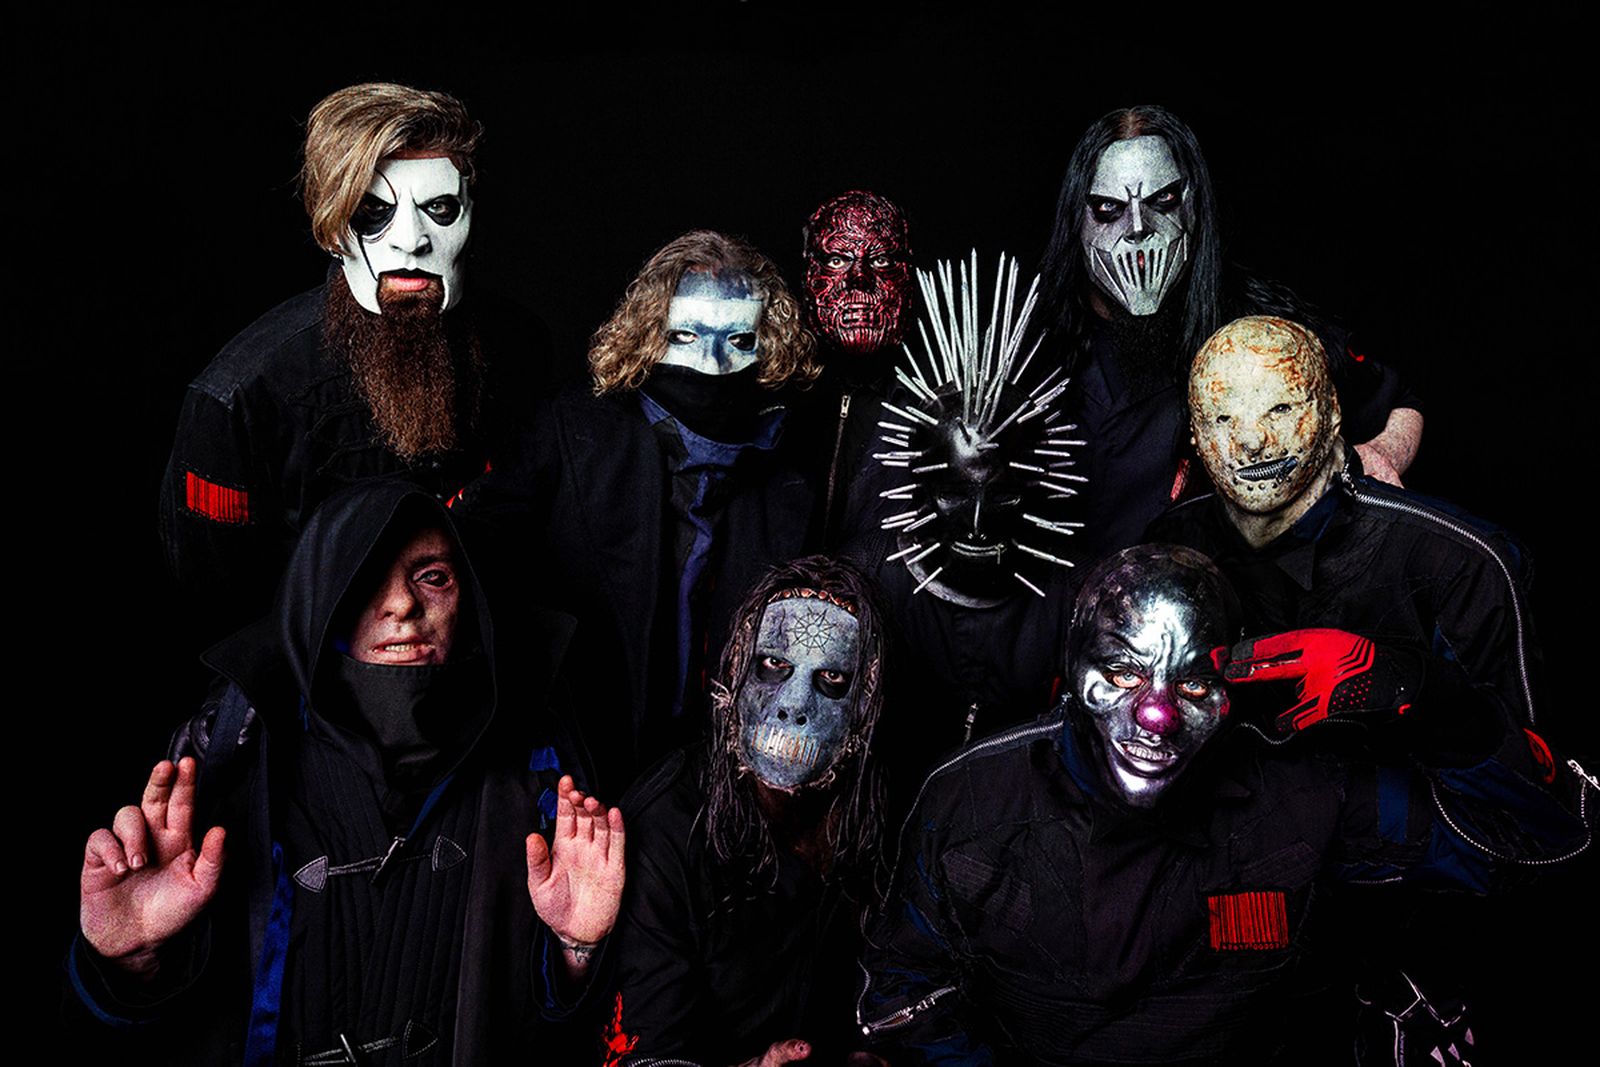 saving-face-a-timeline-of-masked-musicians-who-pioneered-face-covering-new-15